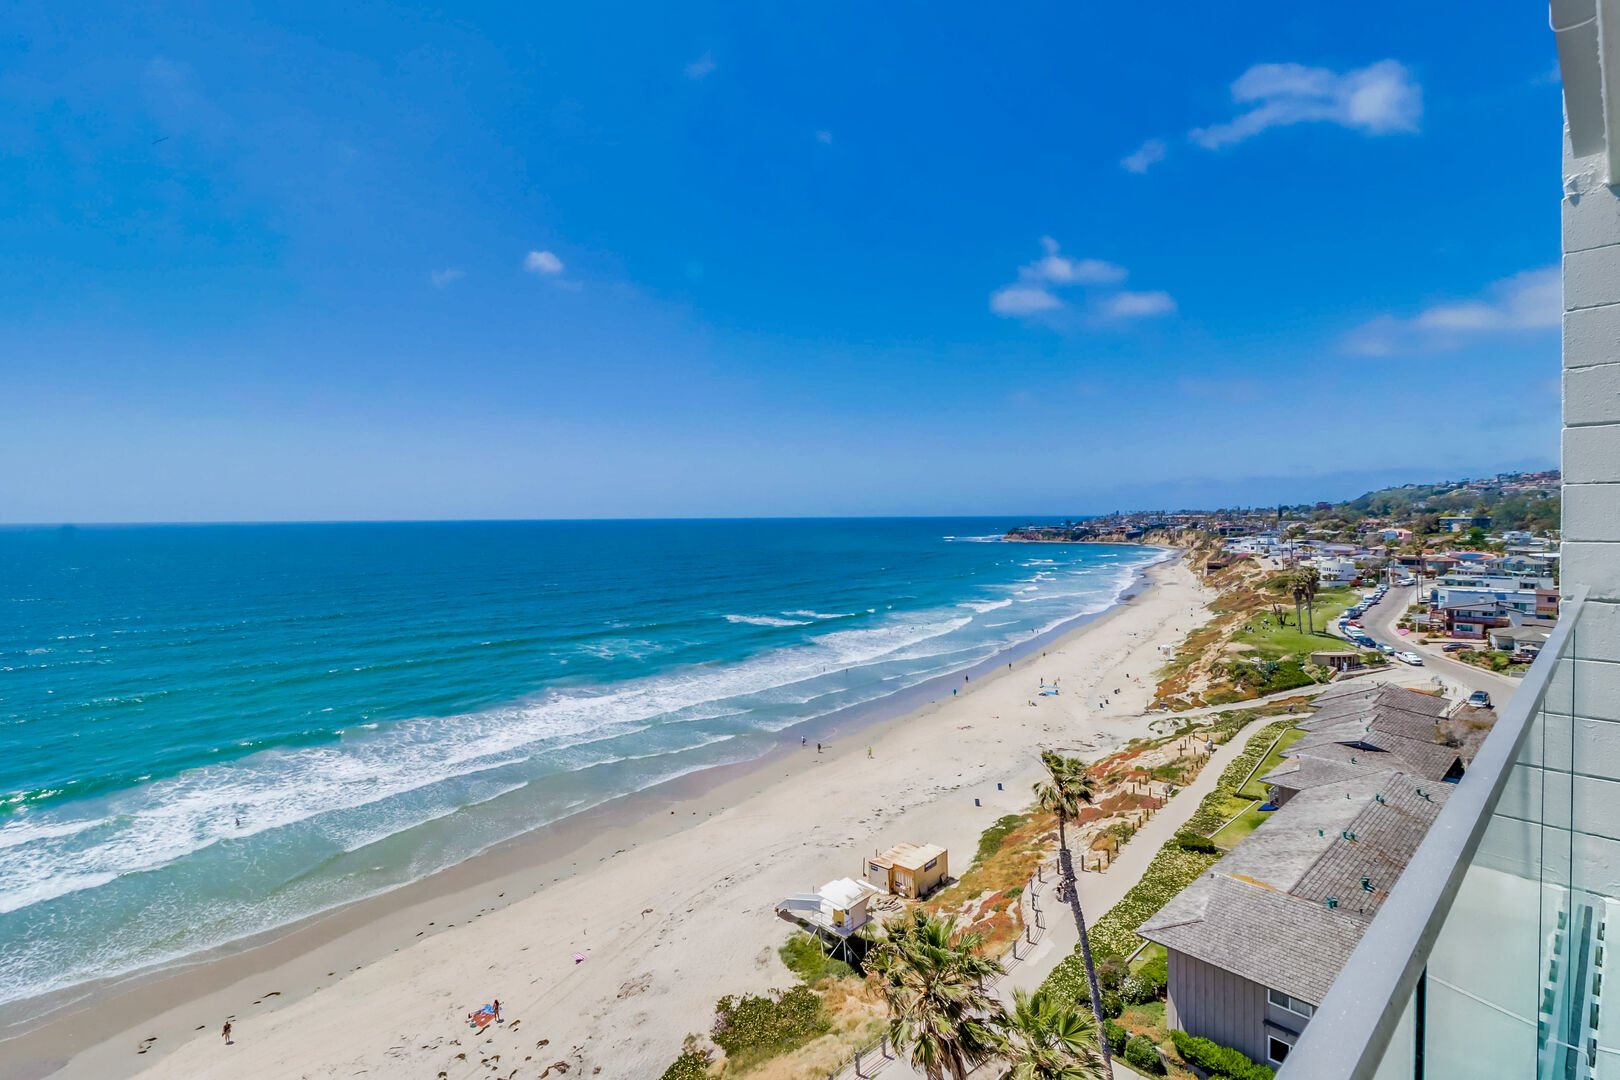 Balcony views extend north toward La Jolla and south toward Crystal Pier! Please note: the balcony is not for standing or sitting